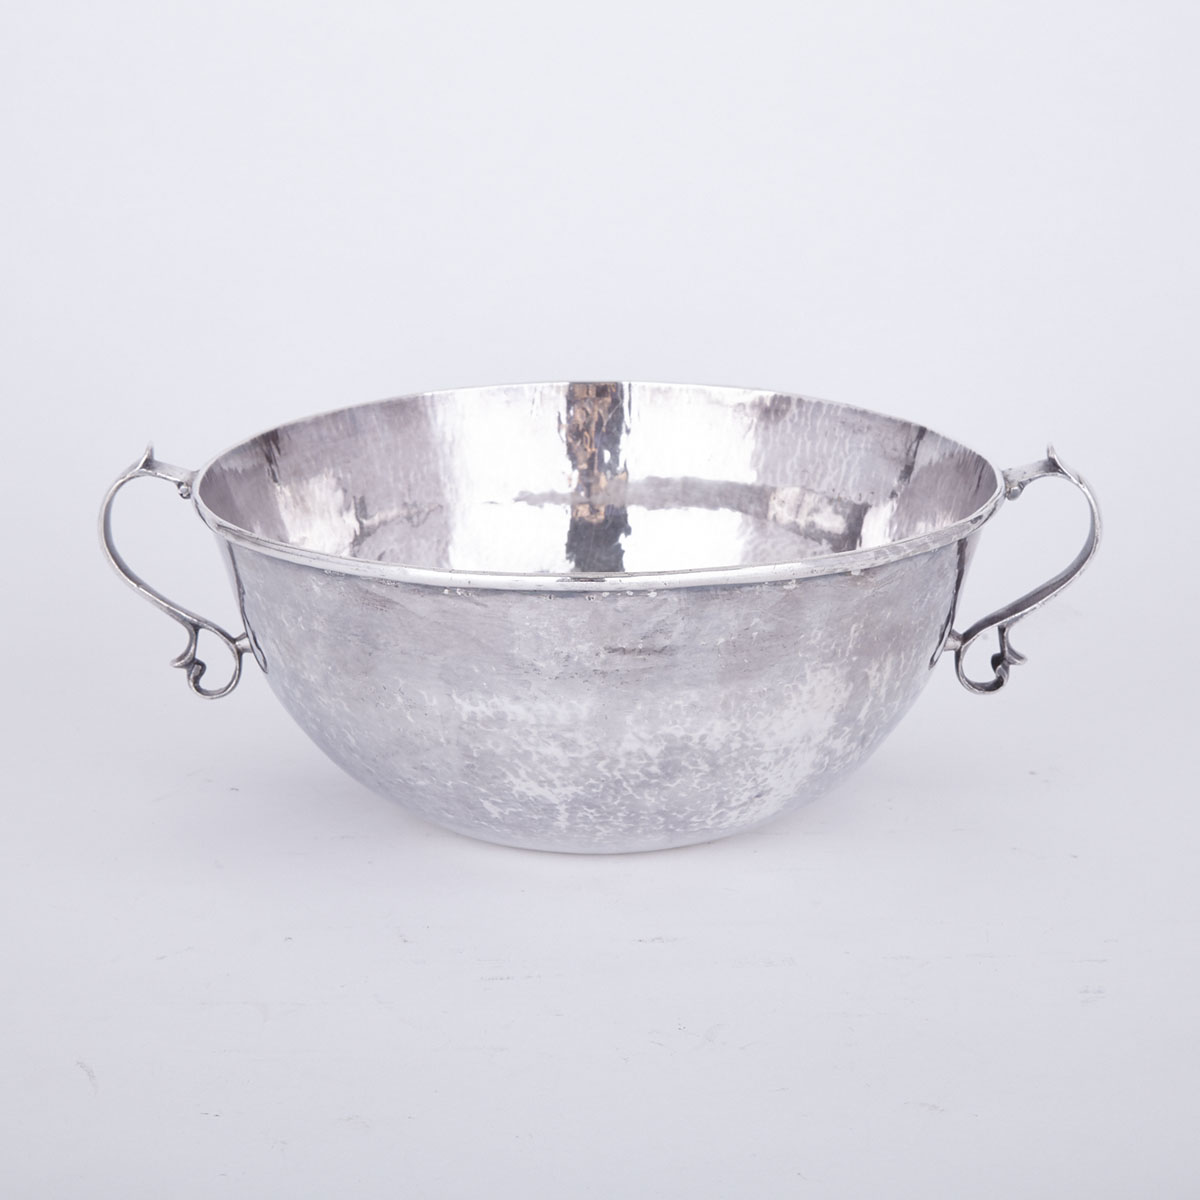 South American Silver Two-Handled Bowl, late 19th/early 20th century